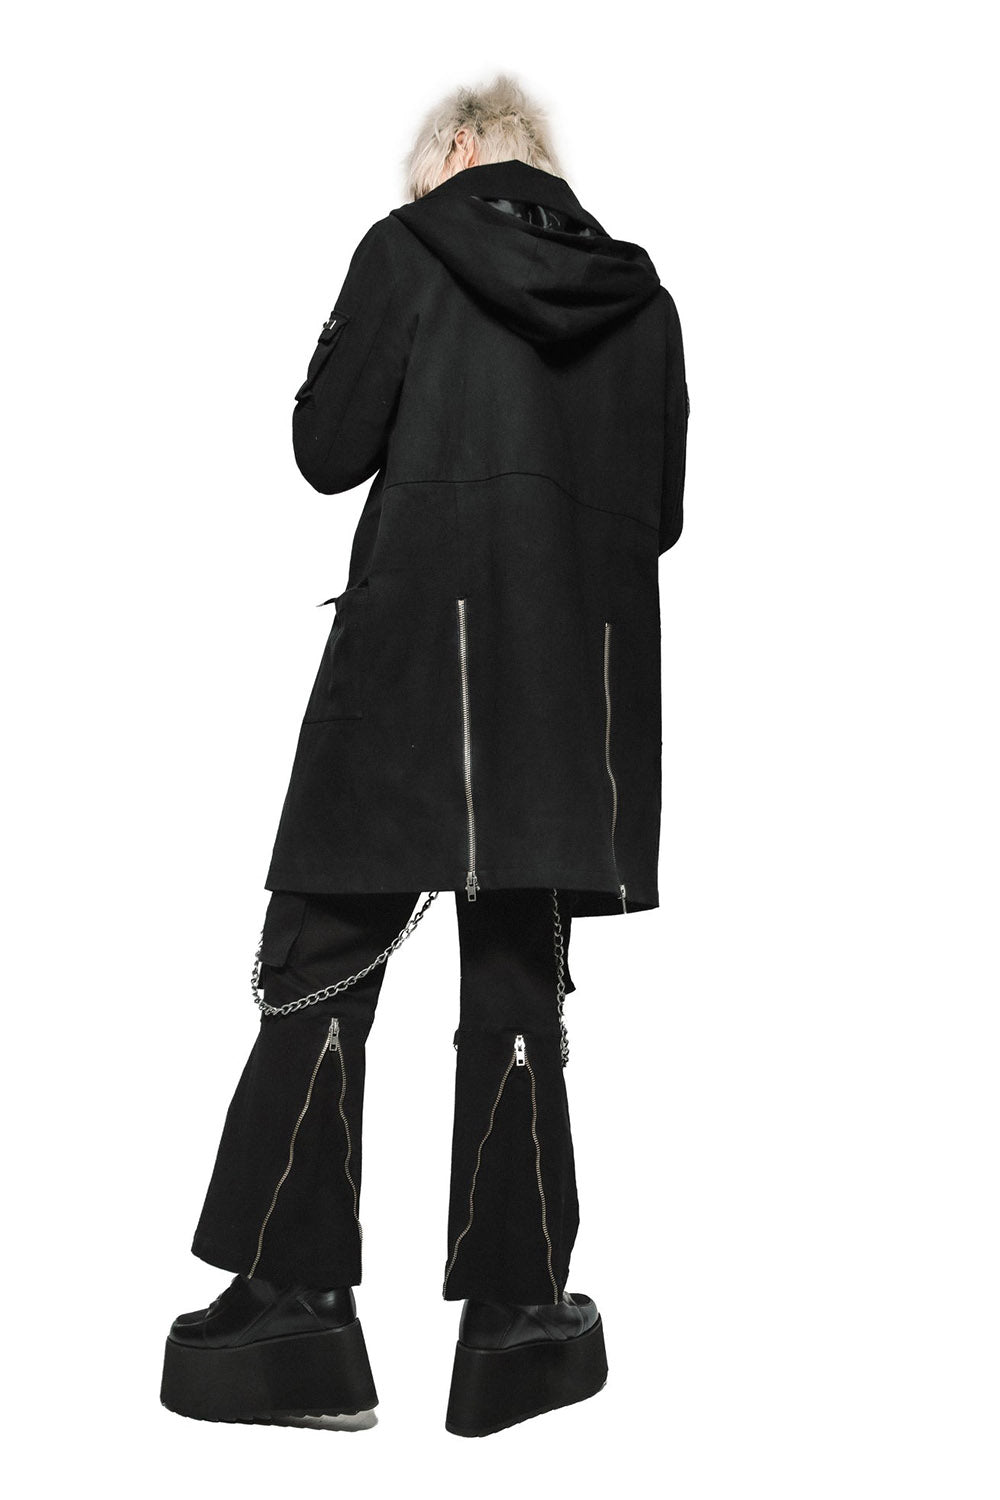 gothic cargo pants with zippered legs